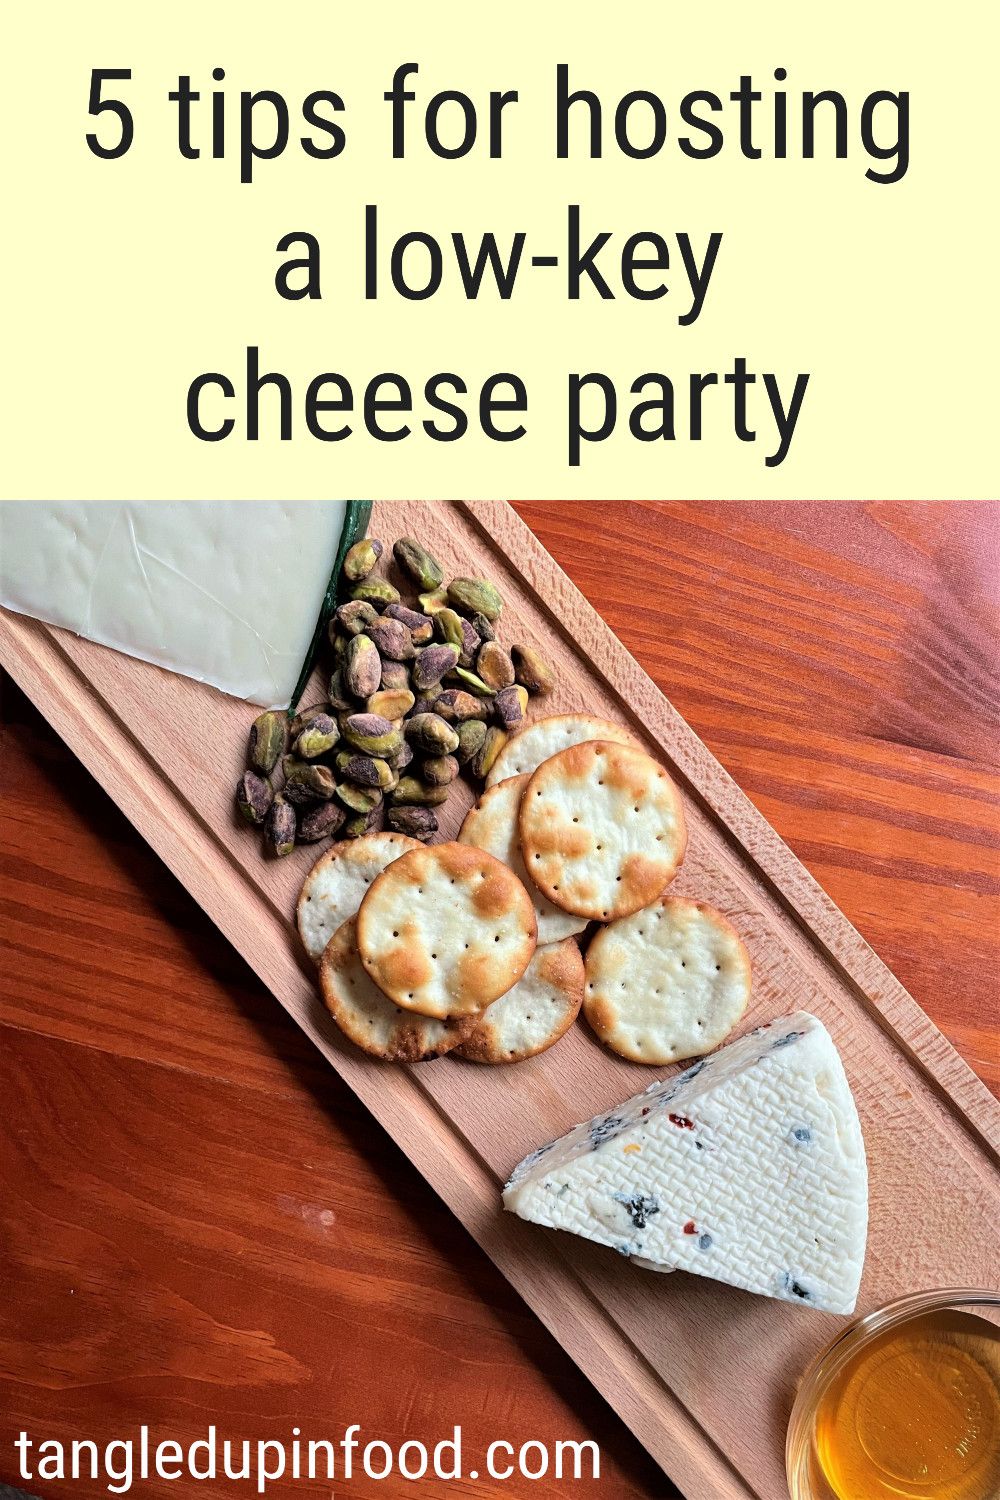 Cheese board with a wedge of blue cheese, pistachios, crackers, and a small bowl of honey and text reading "5 tips for hosting a low-key cheese party"